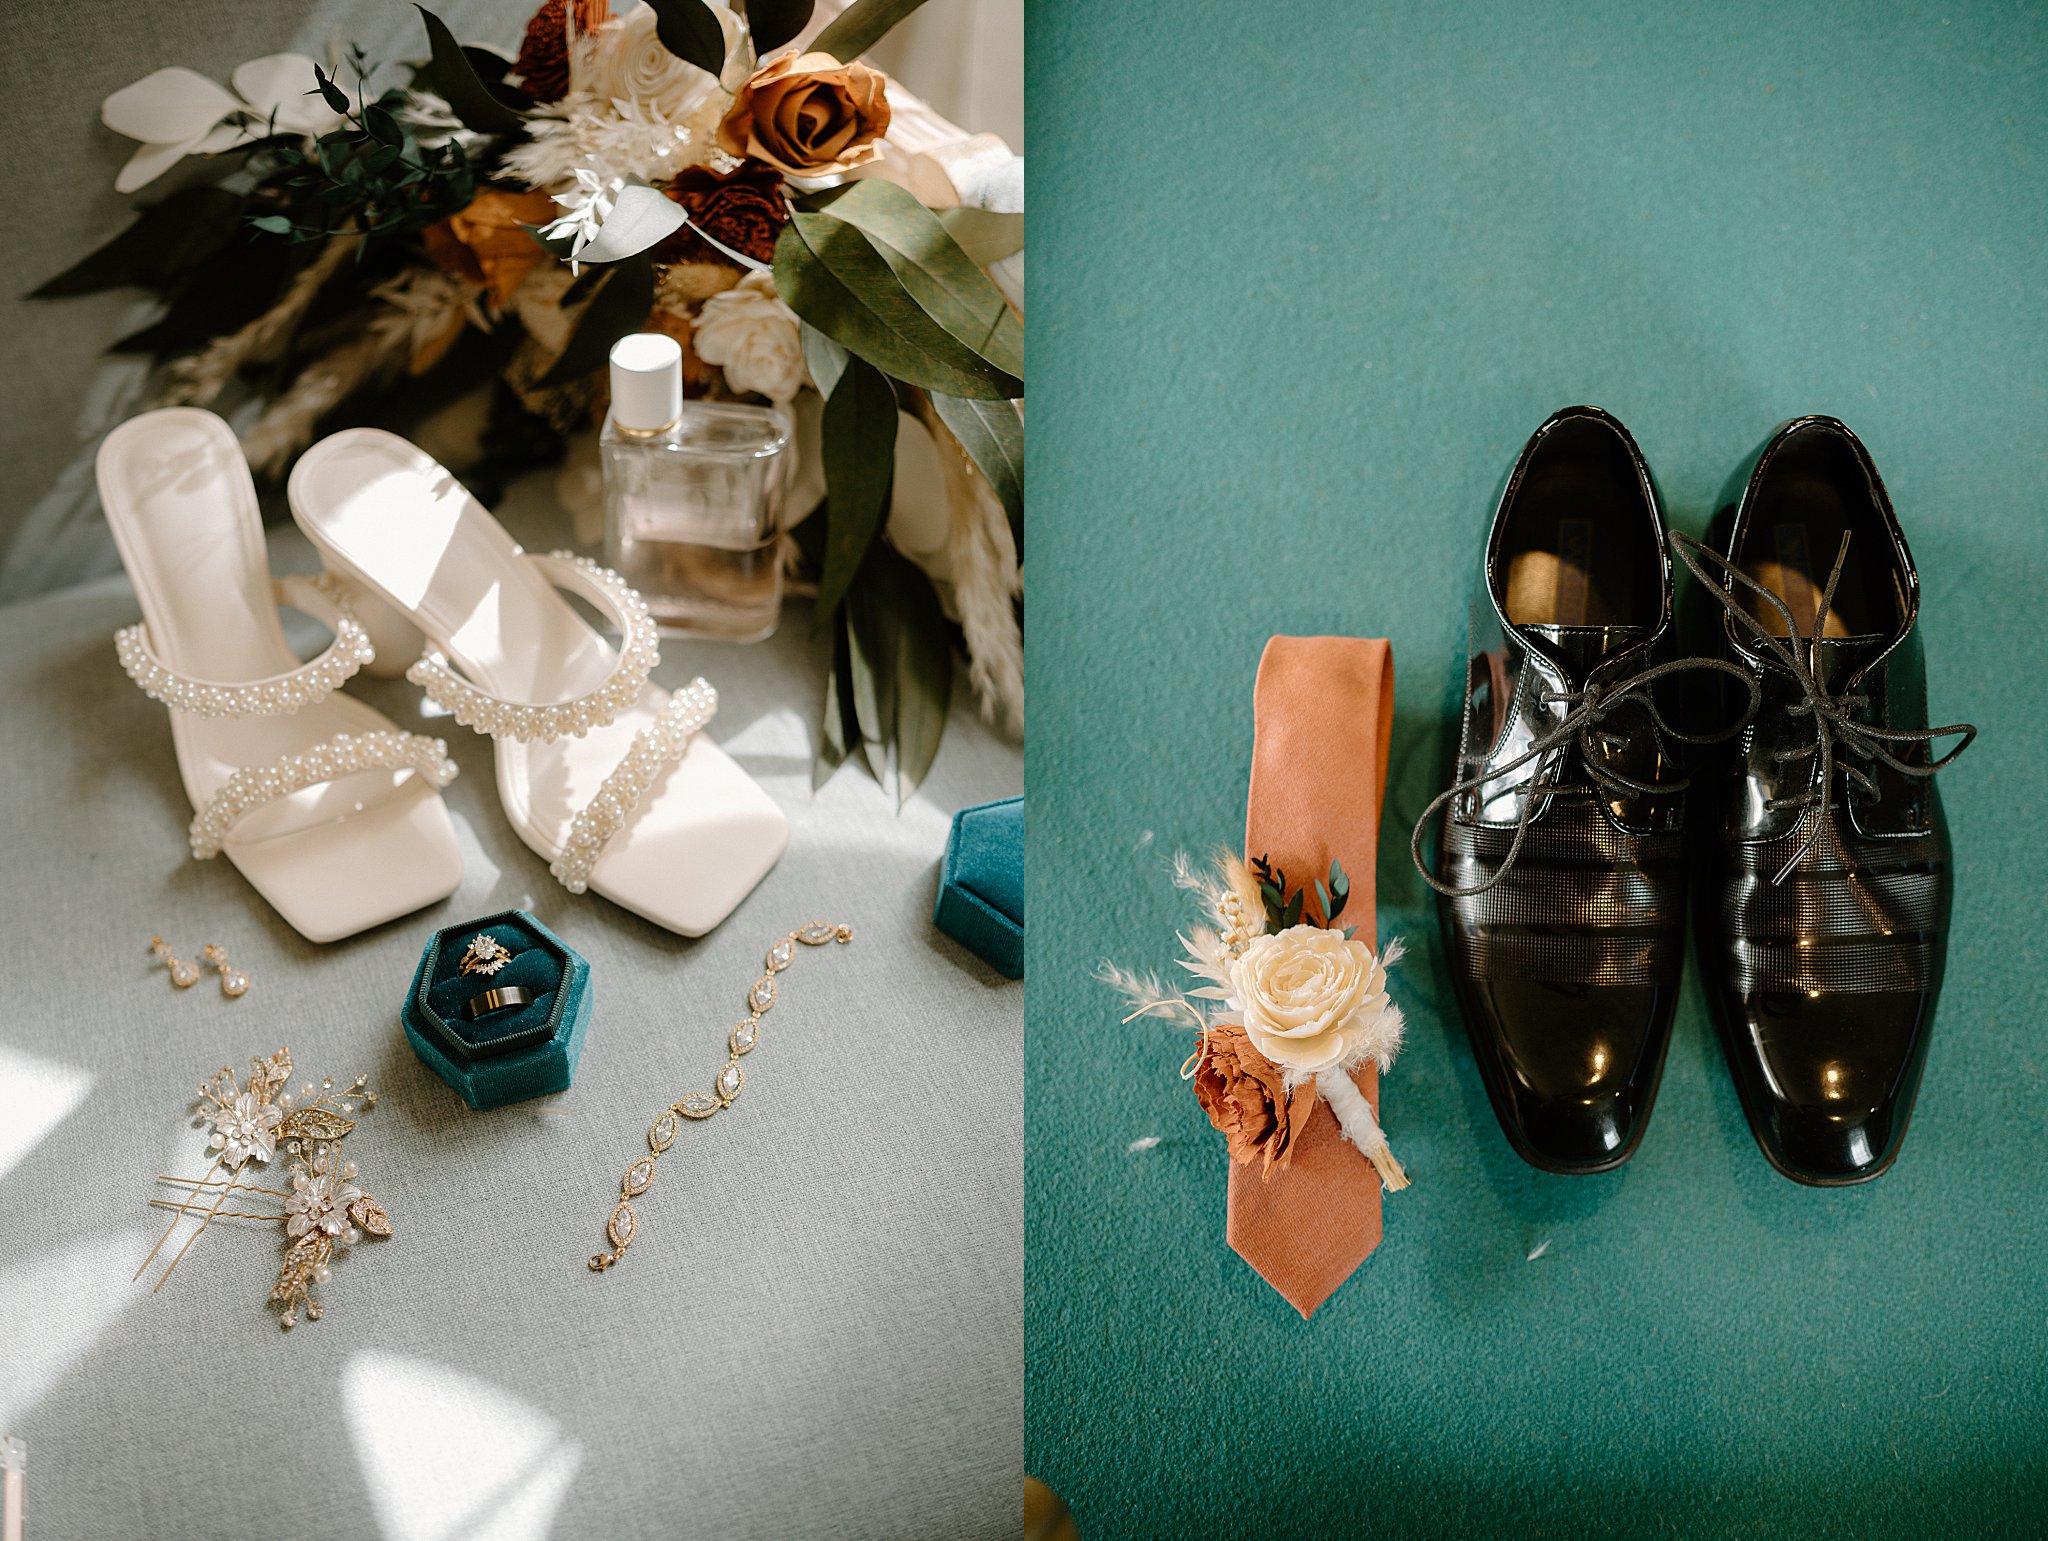 bride's shoes and accessories next to groom's shoes and accessories by Midwest wedding photographer